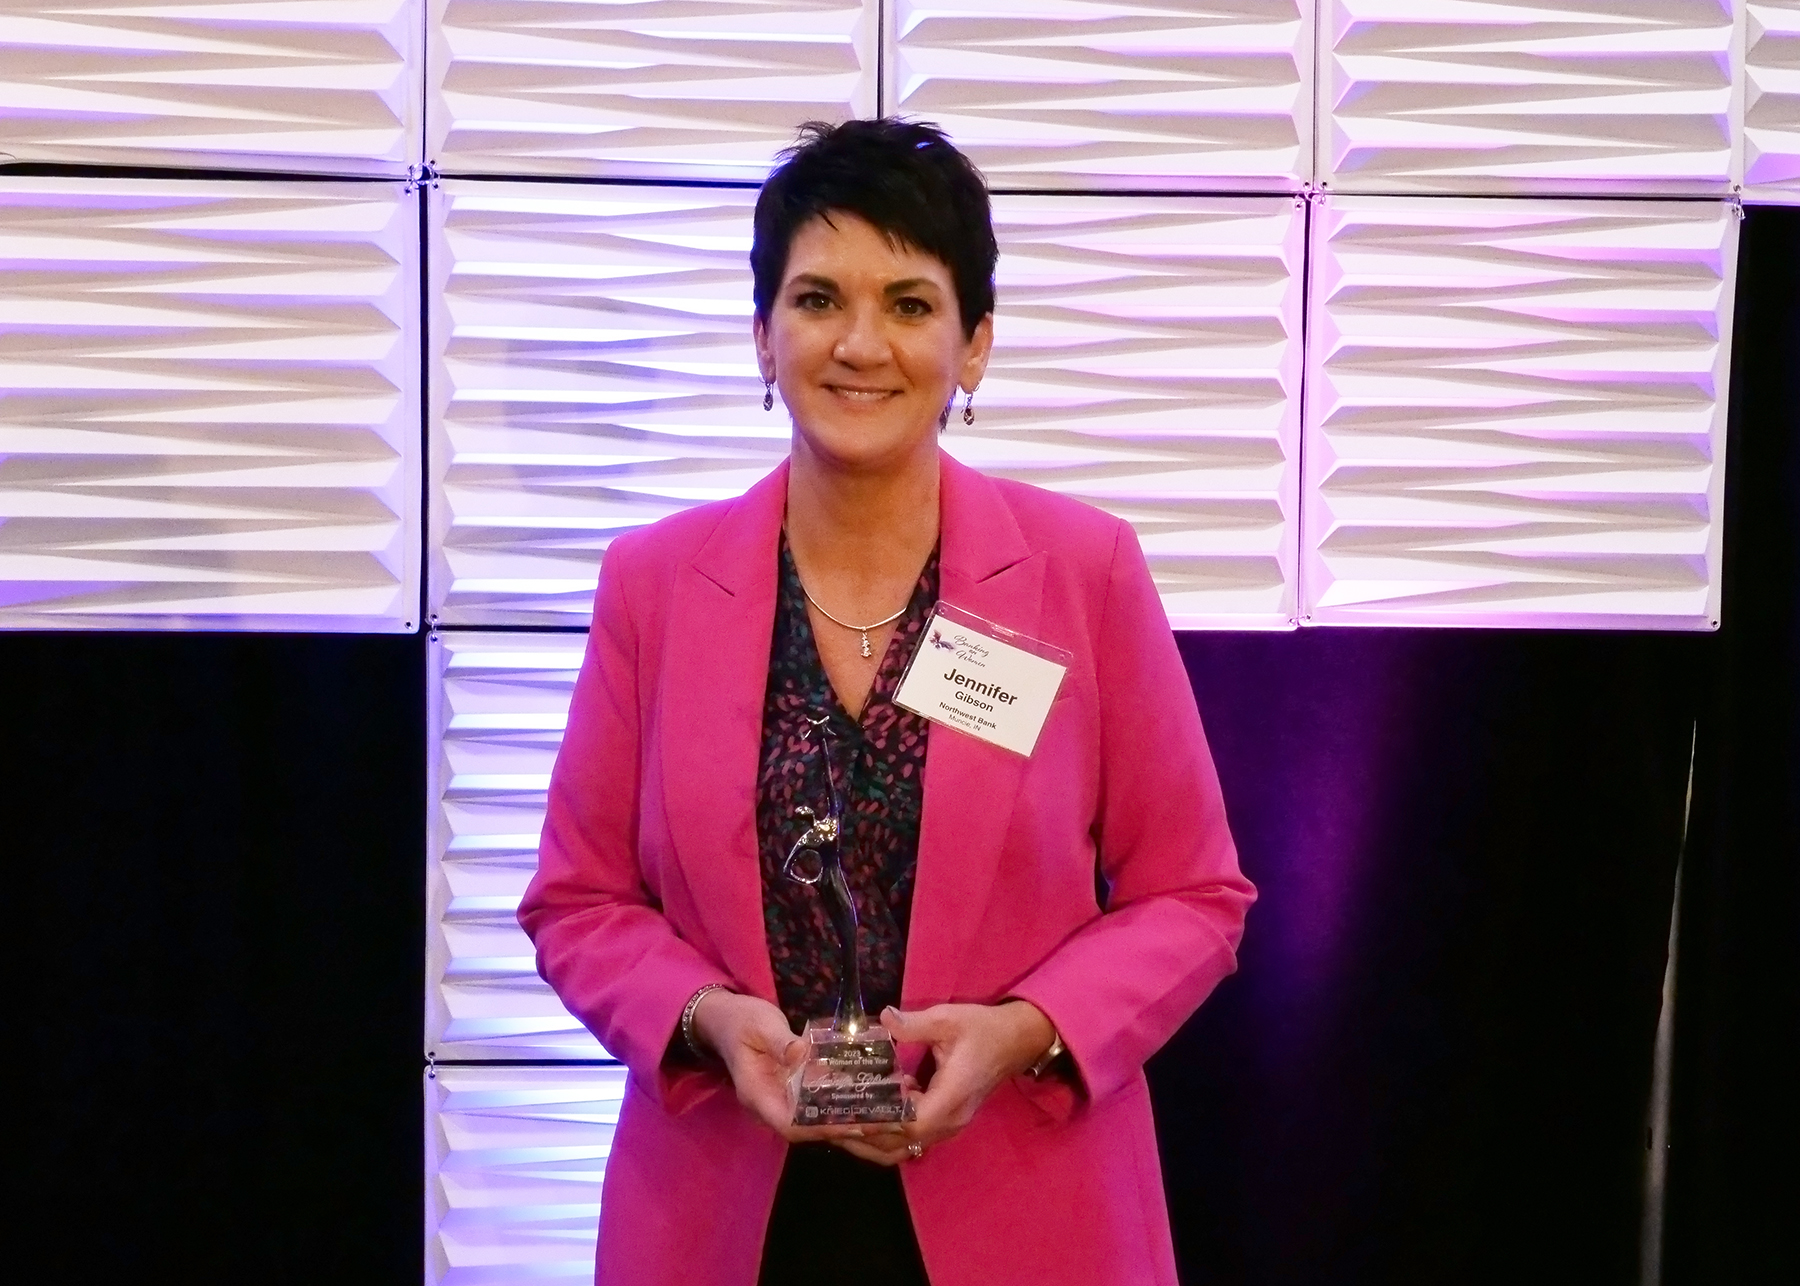 photo showing Jennifer Gibson posing with the 2023 IBA Woman of the Year award